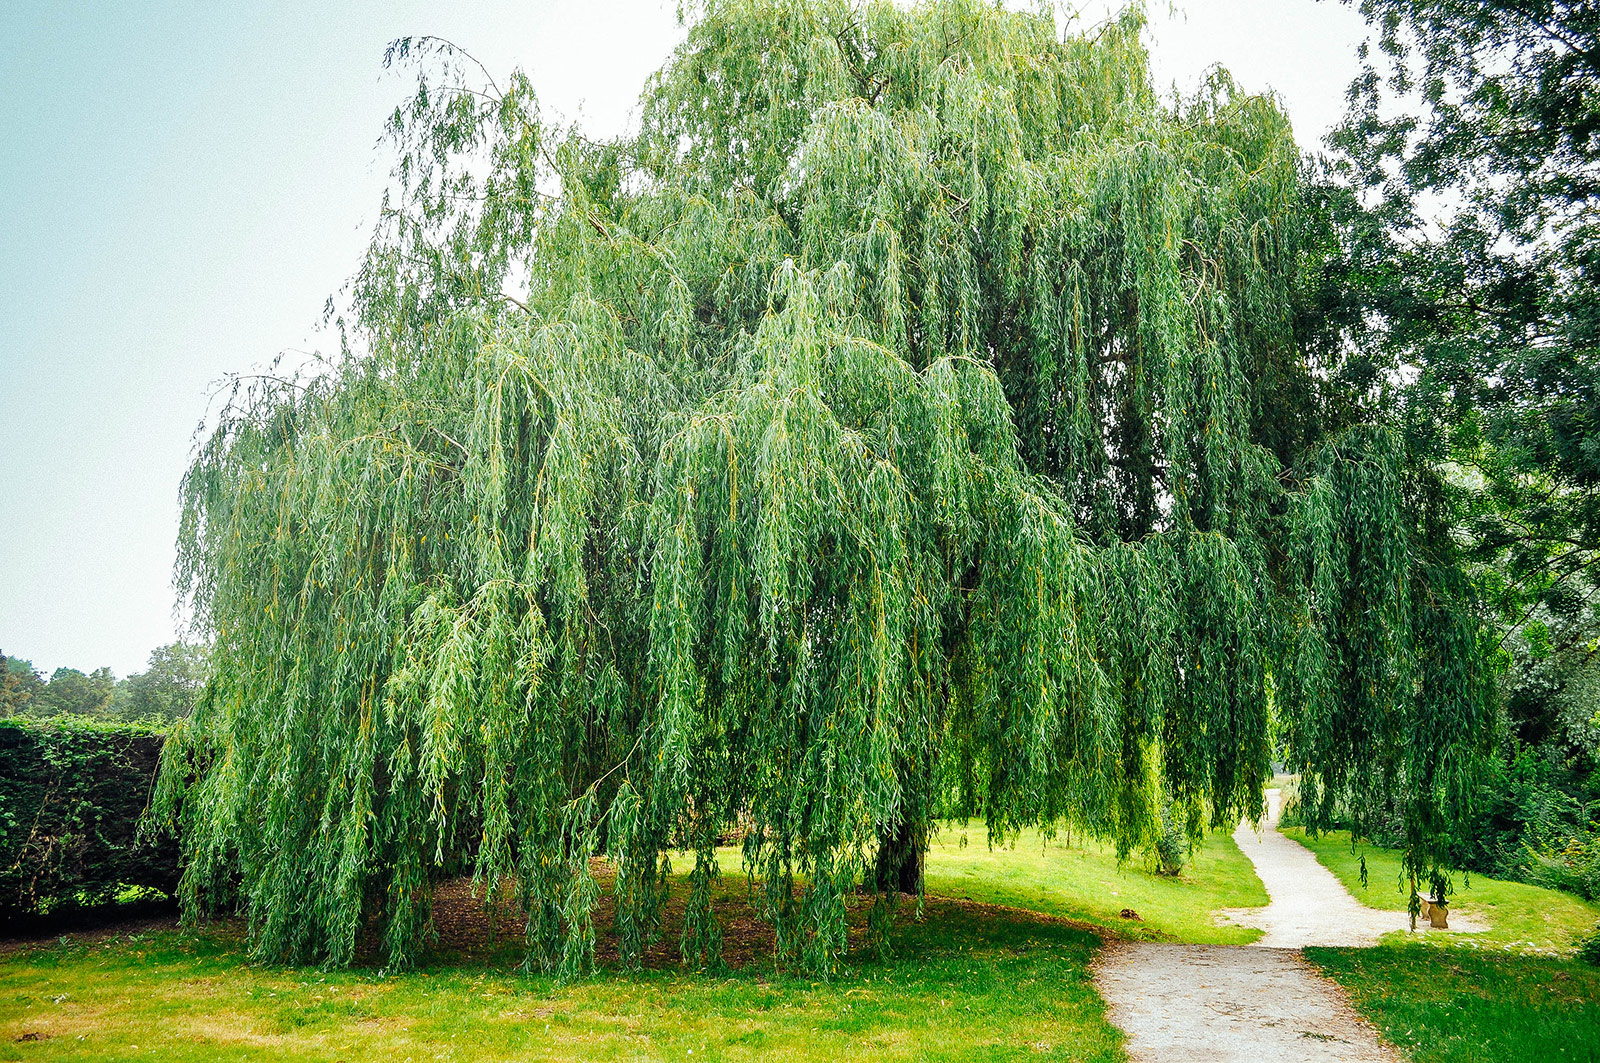 Fast-growing mature weeping willow tree growing on a grassy property with a winding path beside it